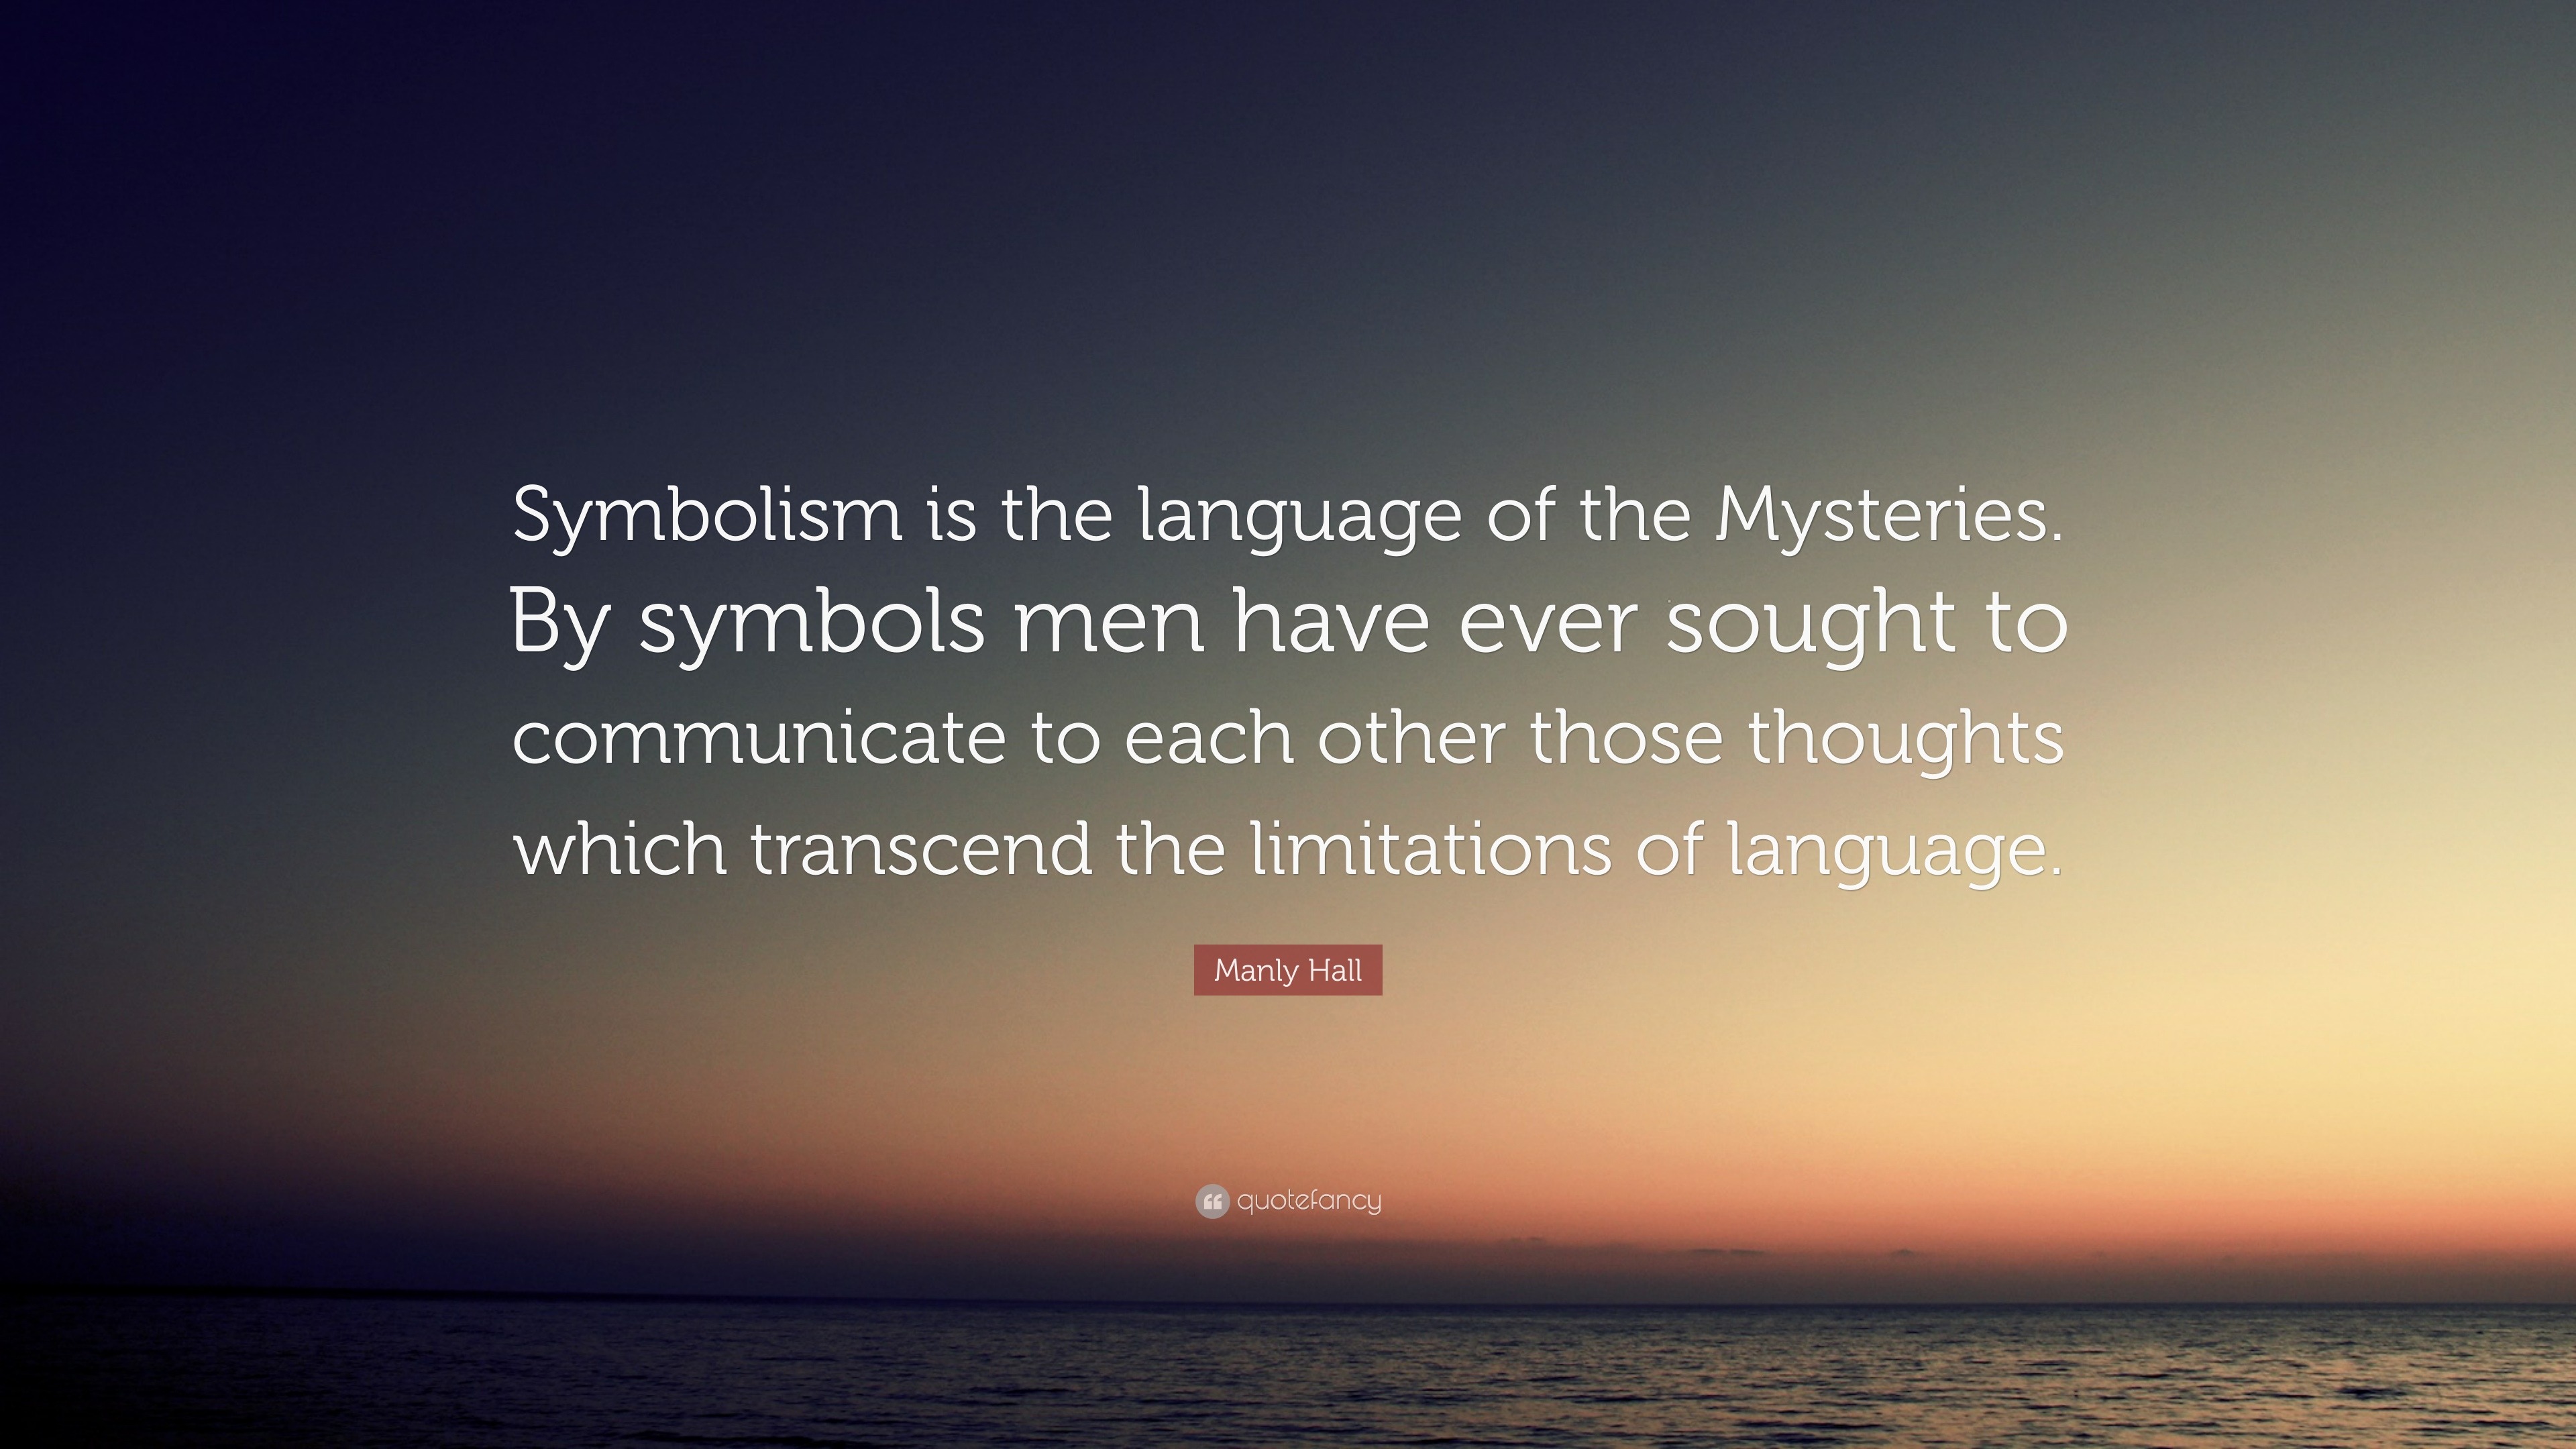 Manly Hall Quote “Symbolism is the language of the Mysteries. By